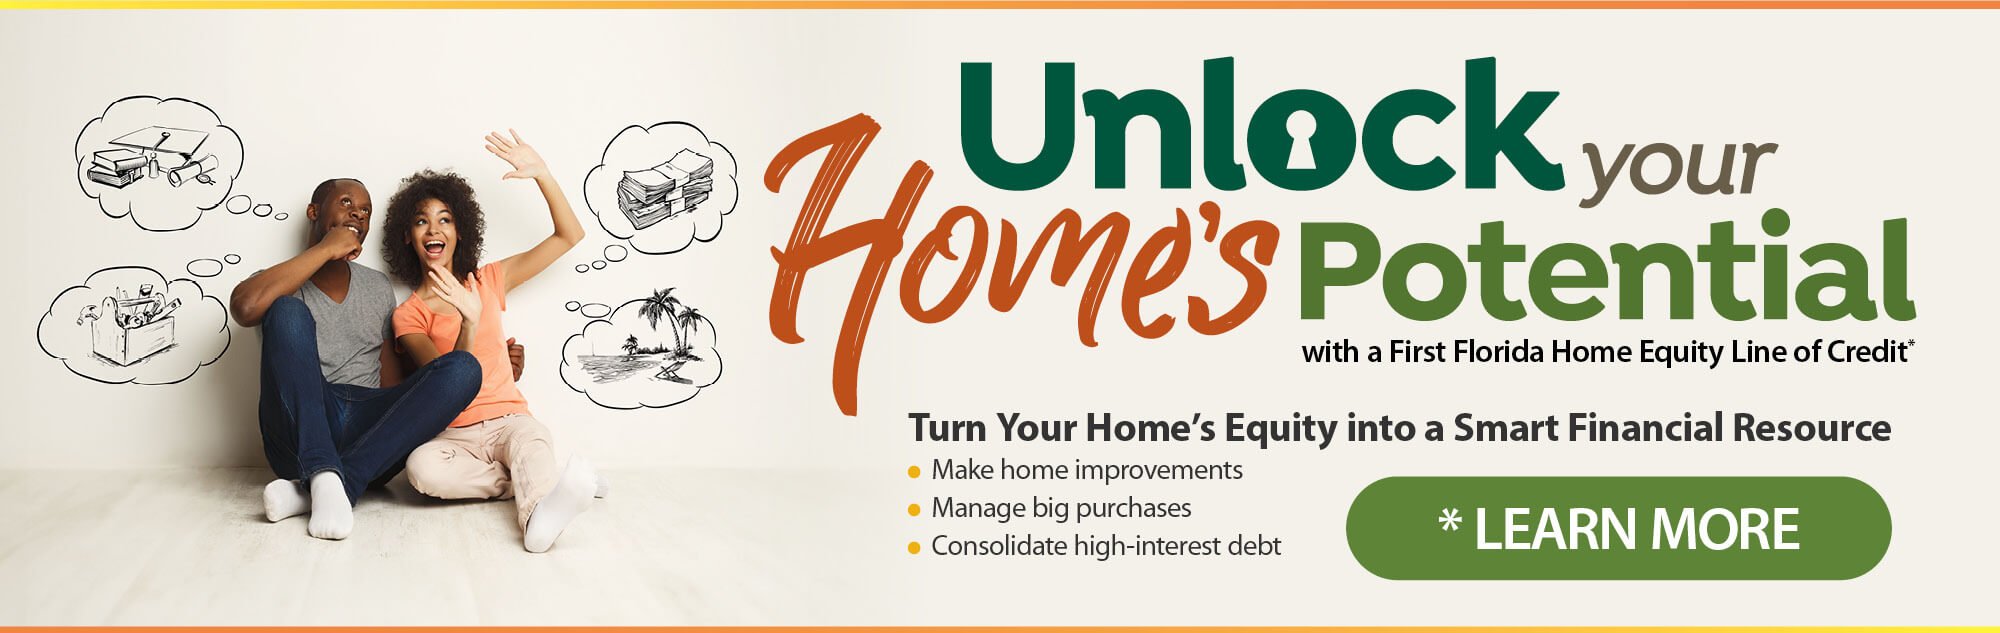 Unlock your Home's Potential with a First Florida Home Equity Line of Credit. Make home improvements. Manage big purchases. Consolidate high-interest debt. Learn more.